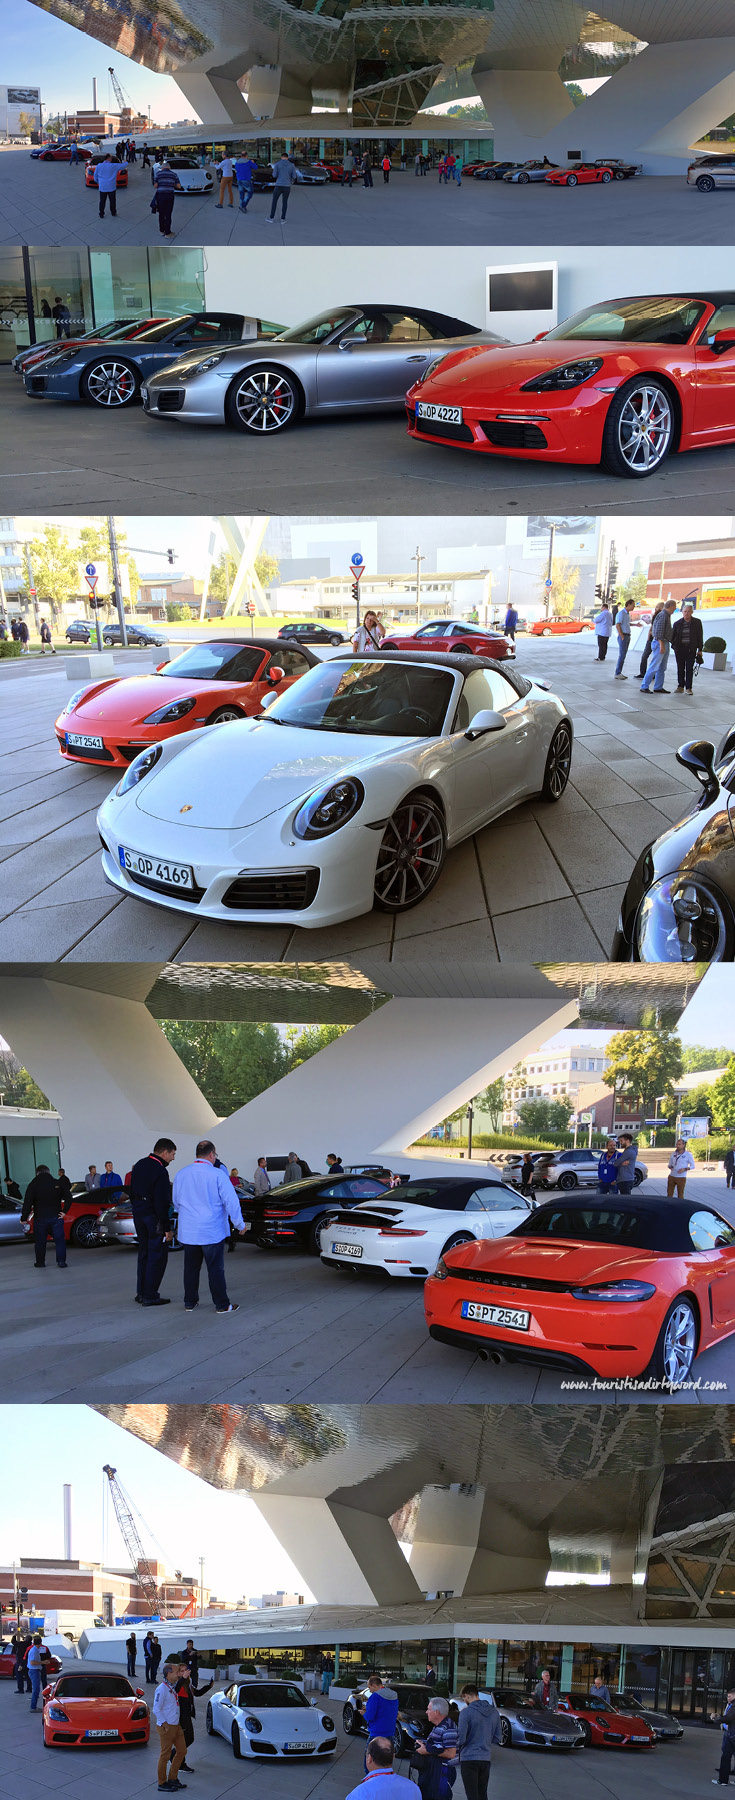  I expected to park in a garage or in a lot, but to my surprise our group has special parking privileges right in front of the Porsche Museum entrance.